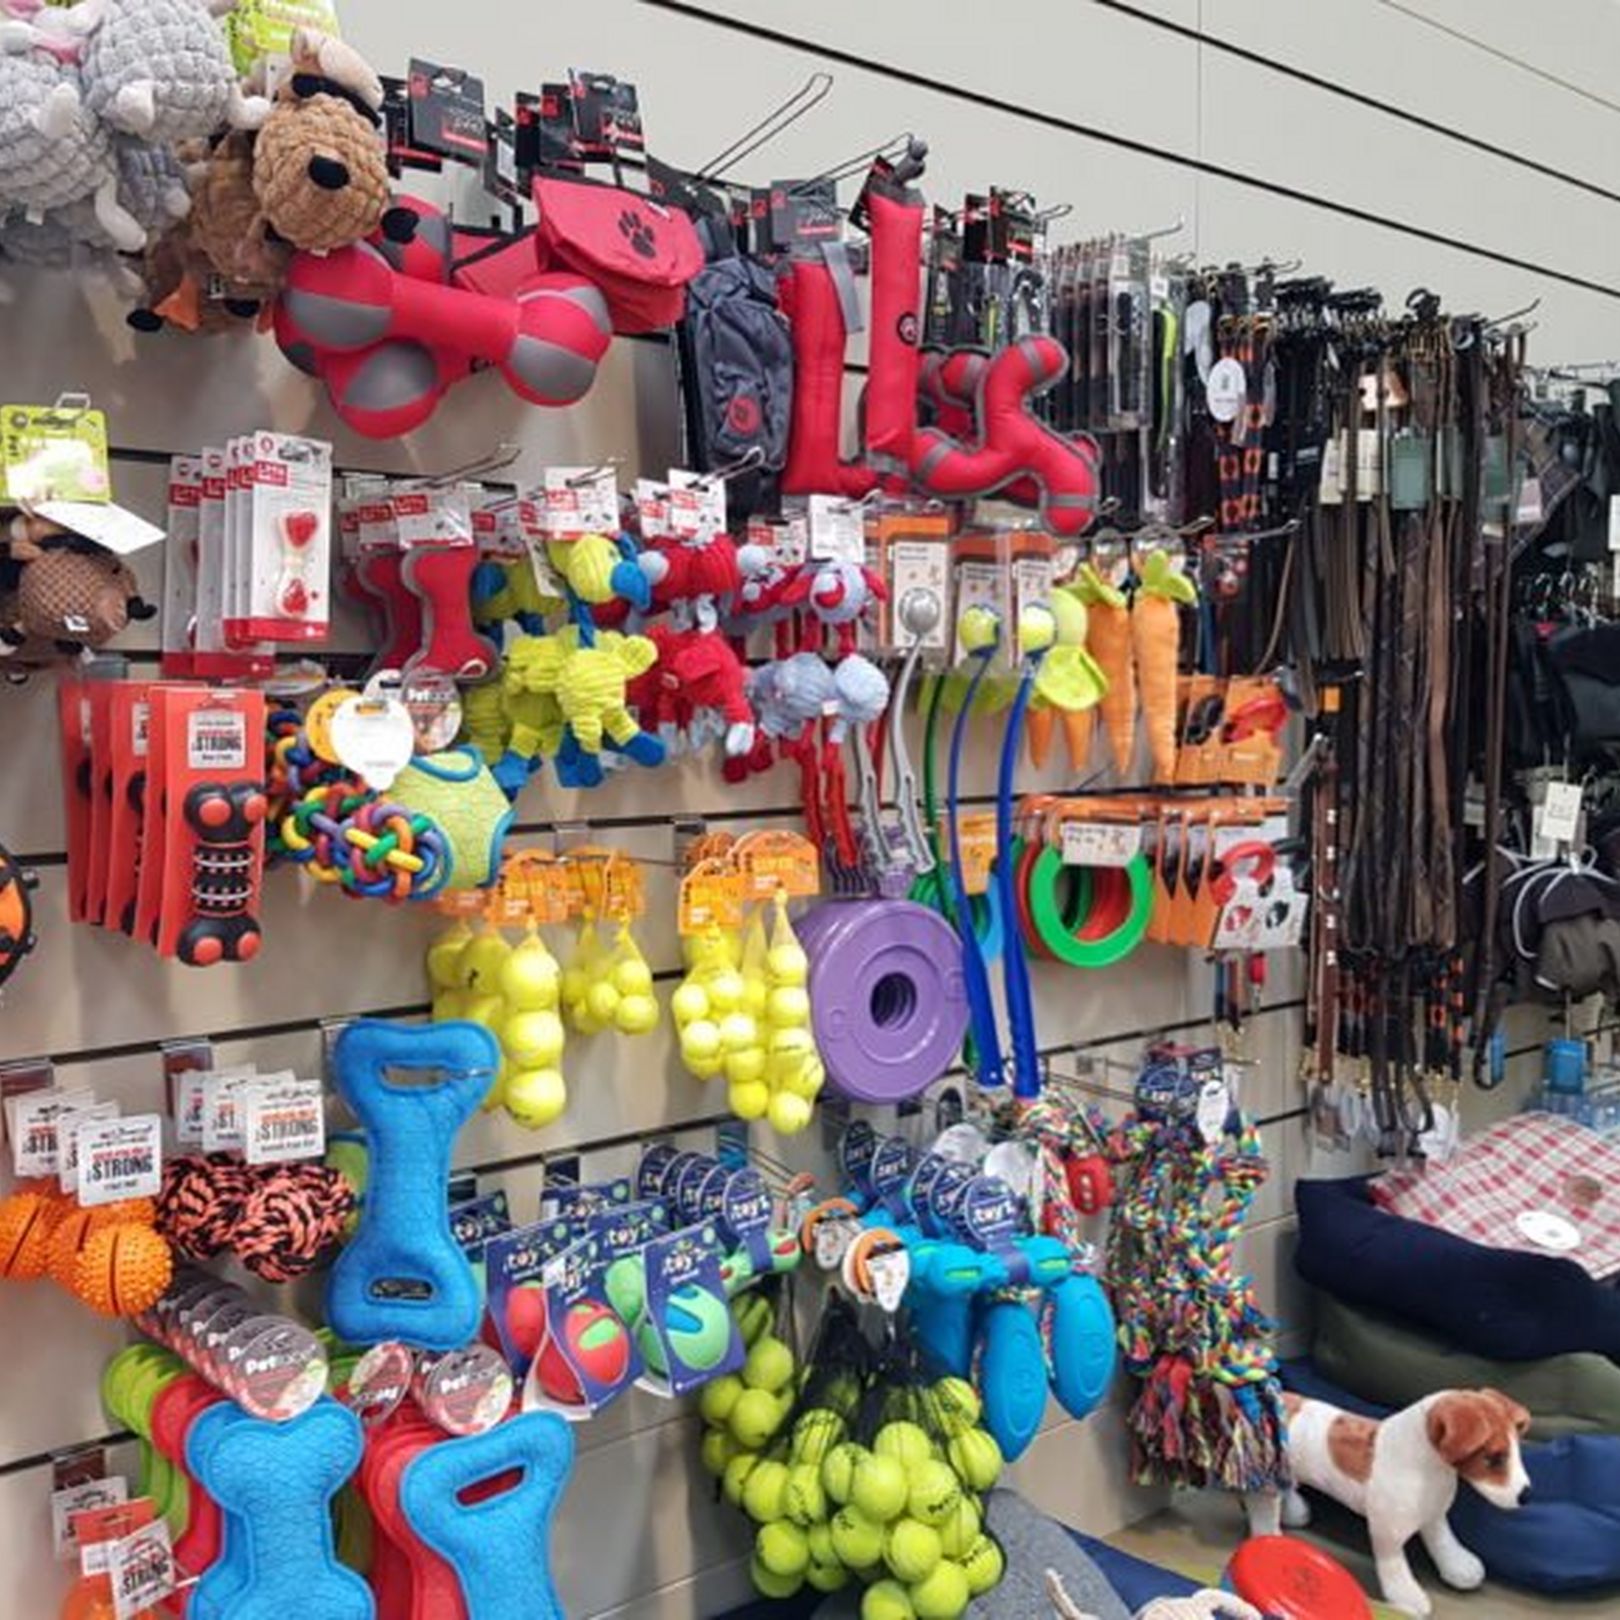 A Range of Pet Products Including Toys, Beds and Accessories